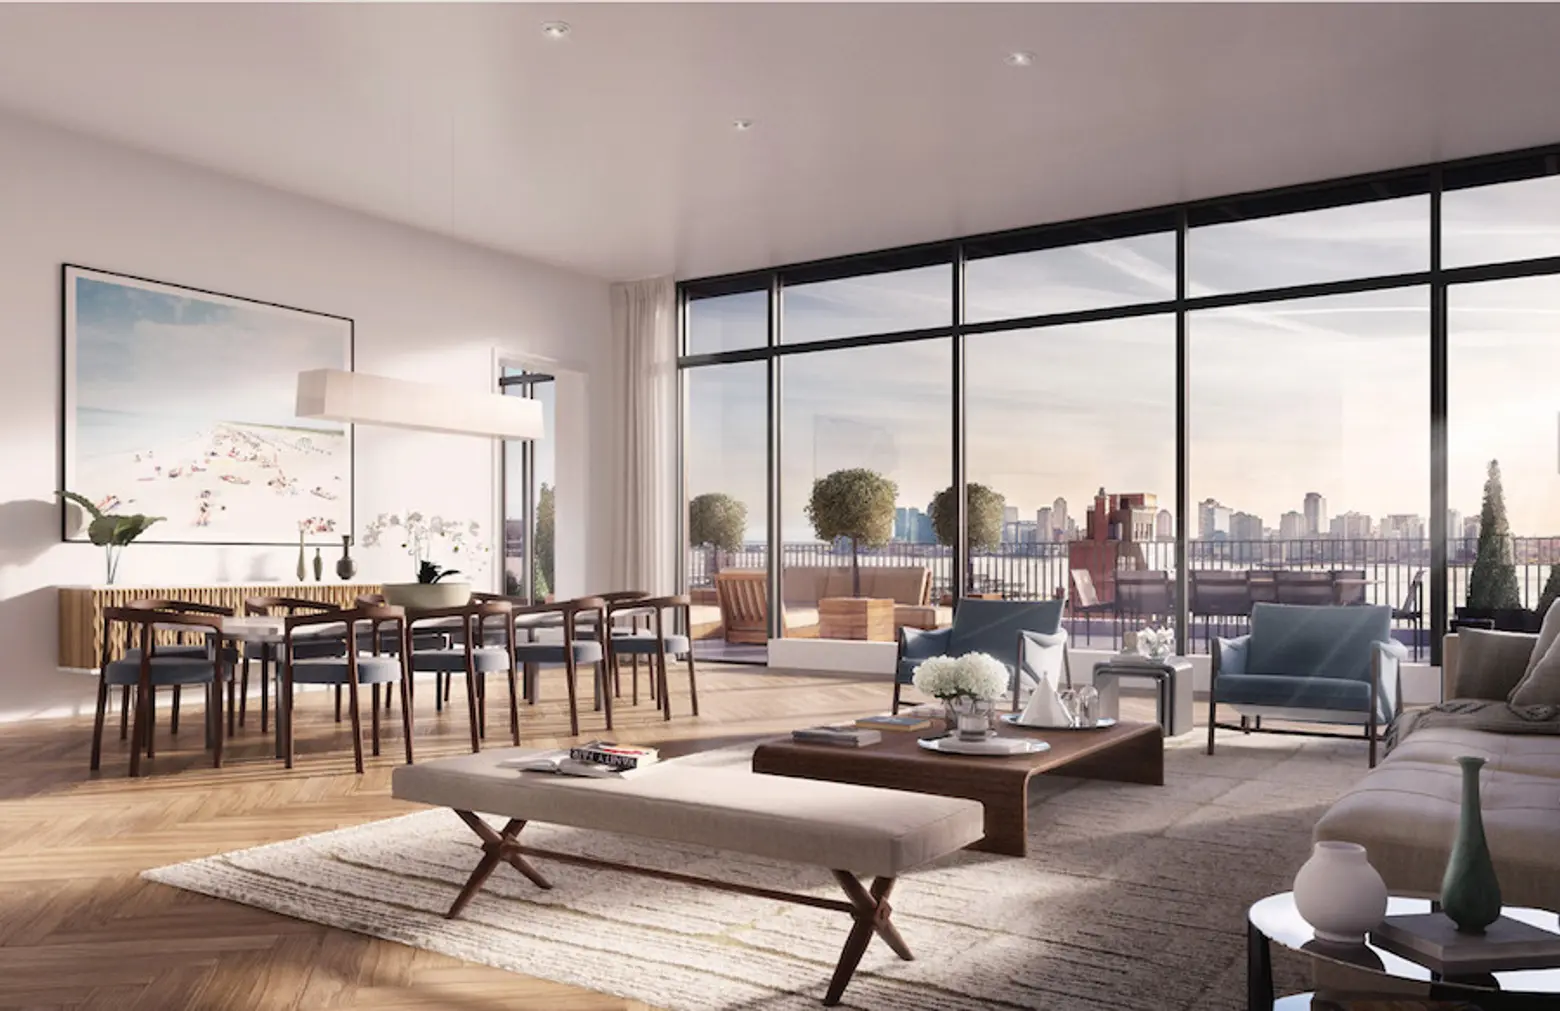 ‘Law & Order SVU’ actress Stephanie March snags a two-unit penthouse at the Shephard for $35M